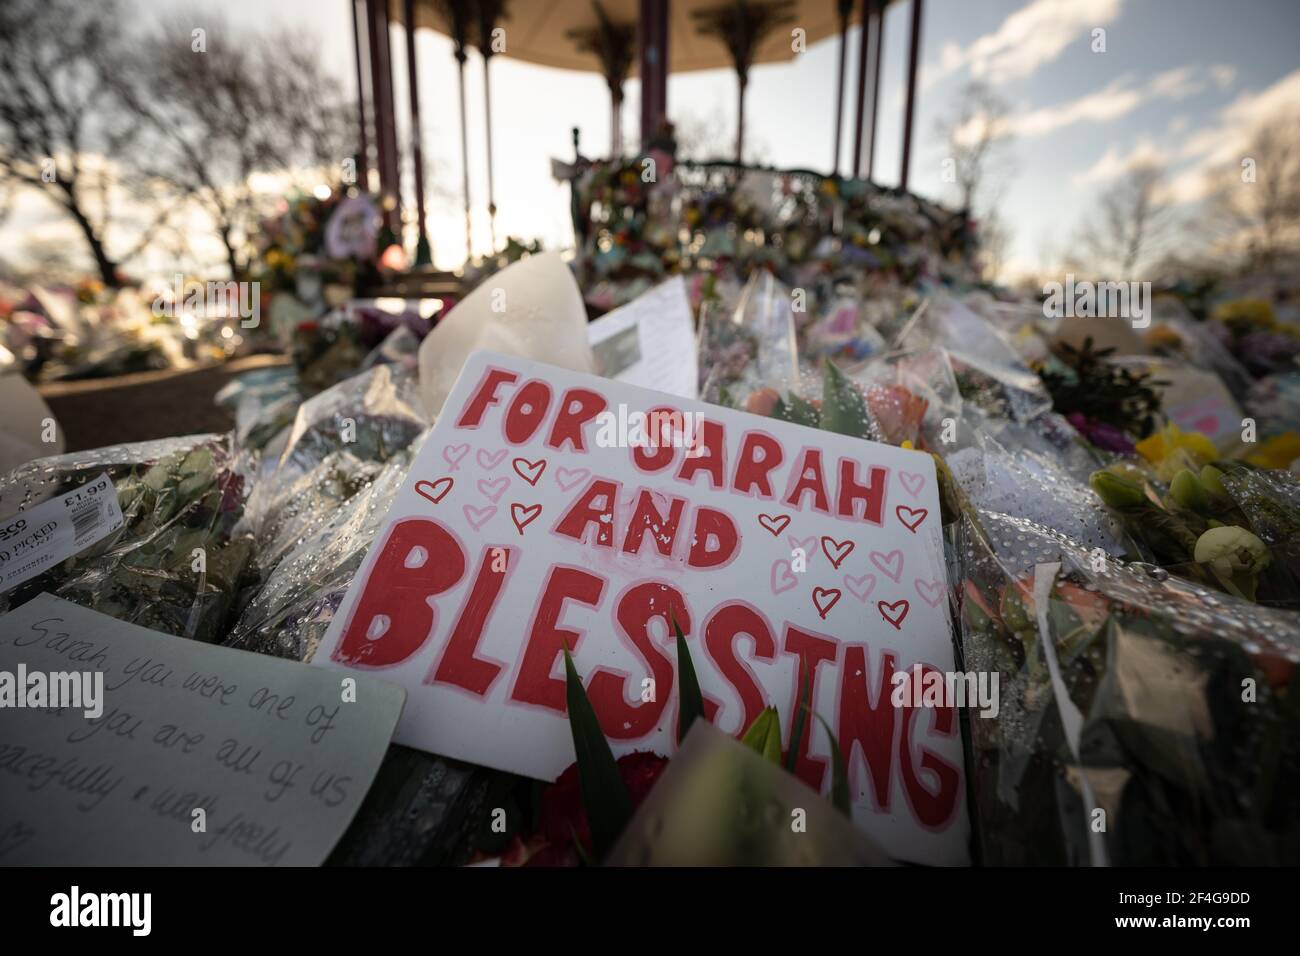 London, UK. 21st March, 2021. Death of Sarah Everard: Floral tributes continue at Clapham Common bandstand in memory of murdered 33-year-old marketing executive Sarah Everard who went missing on Wednesday 3rd March after leaving a friend's house near Clapham Common to walk home. Credit: Guy Corbishley/Alamy Live News Stock Photo